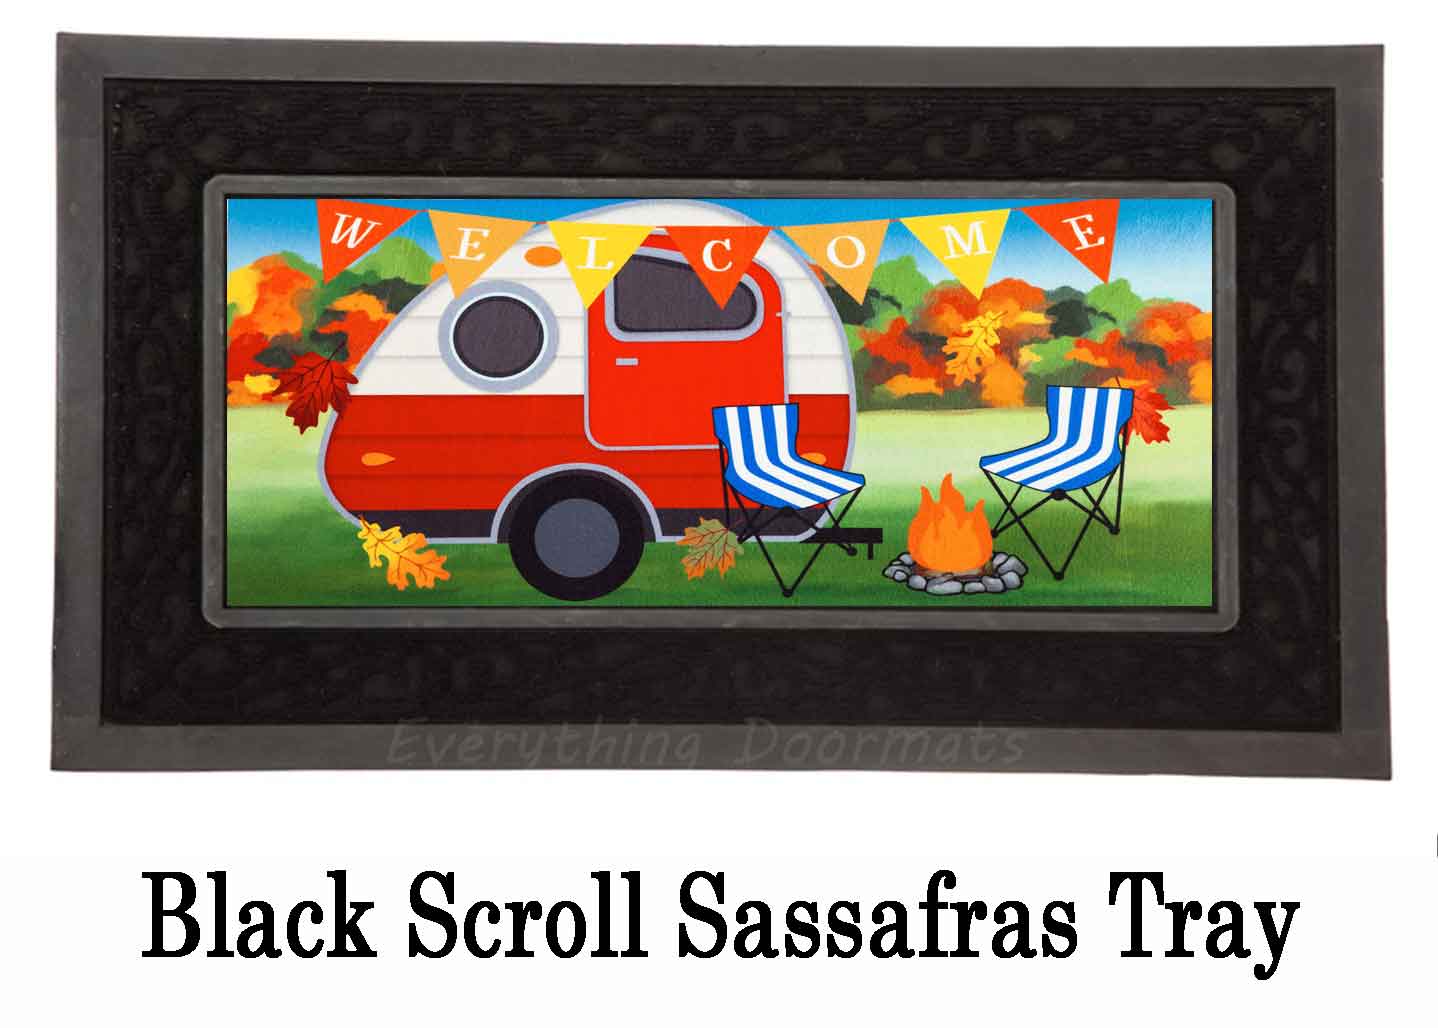 https://www.everythingdoormats.com/images/products/fall-camper-welcome-sassafras-switch-insert-doormat-in-black-scroll-tray.jpg